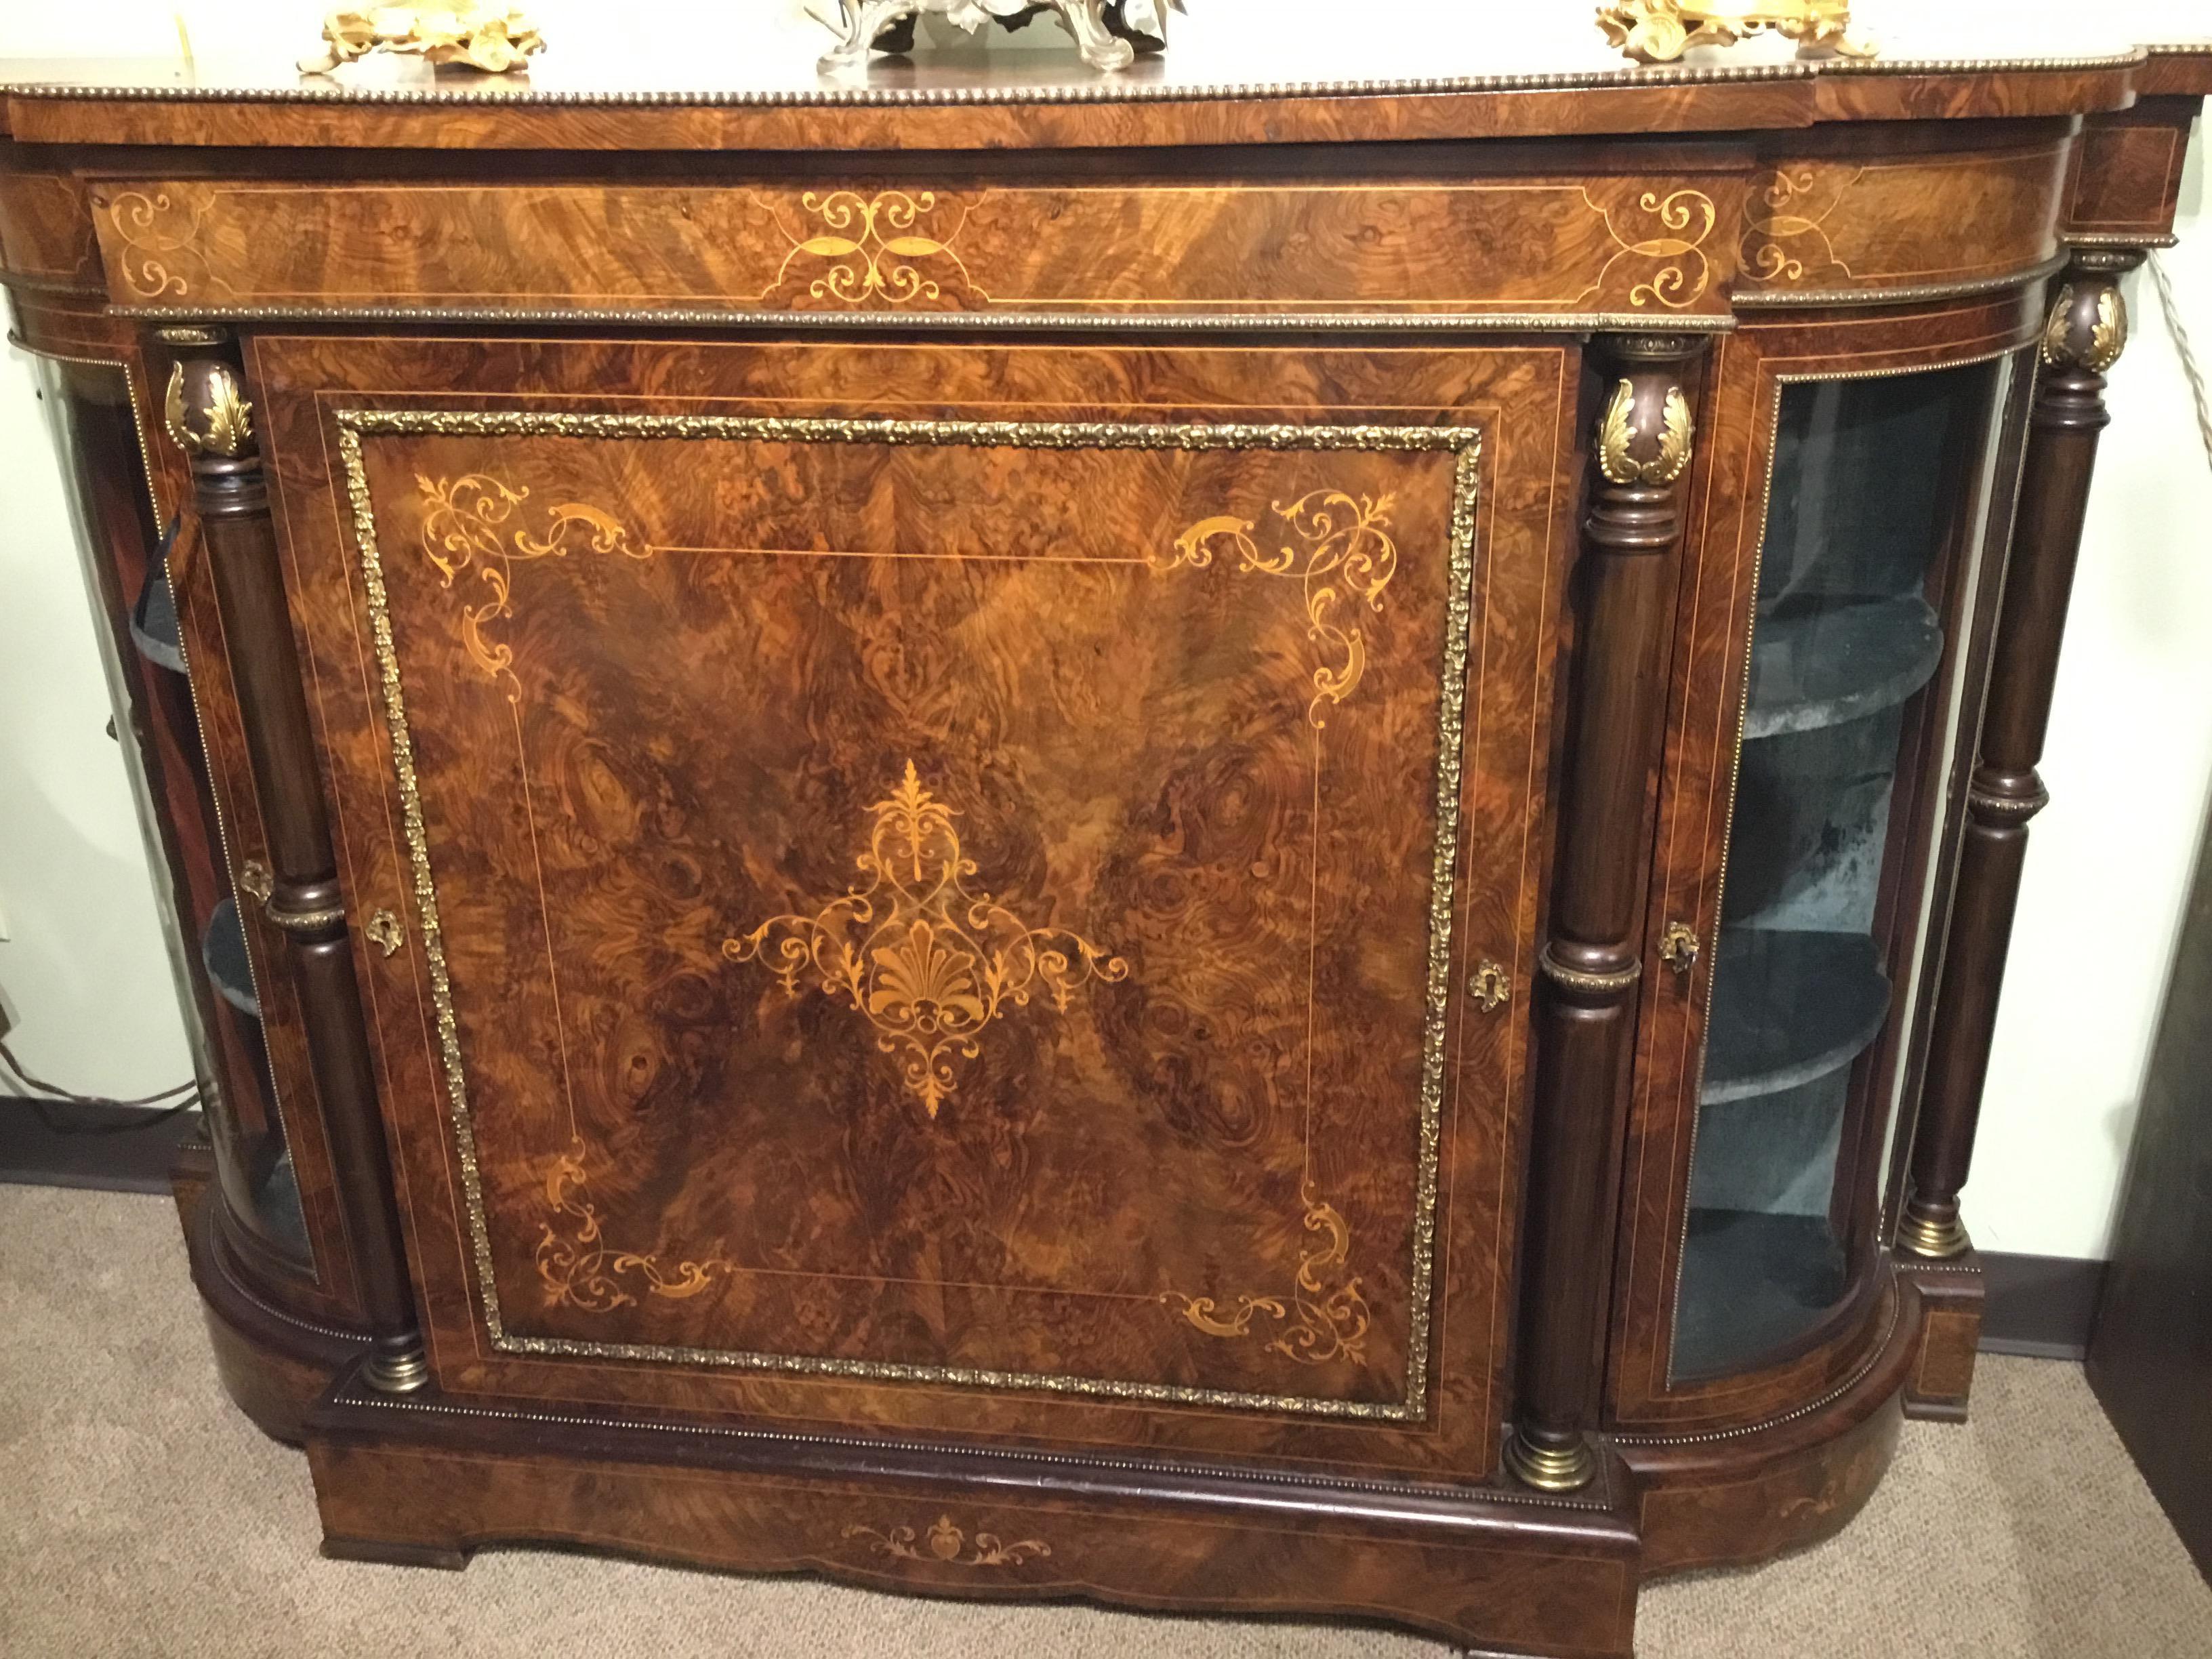 Edwardian Style Antique Cabinet, 19th Century Burled Walnut with Marquetry 3